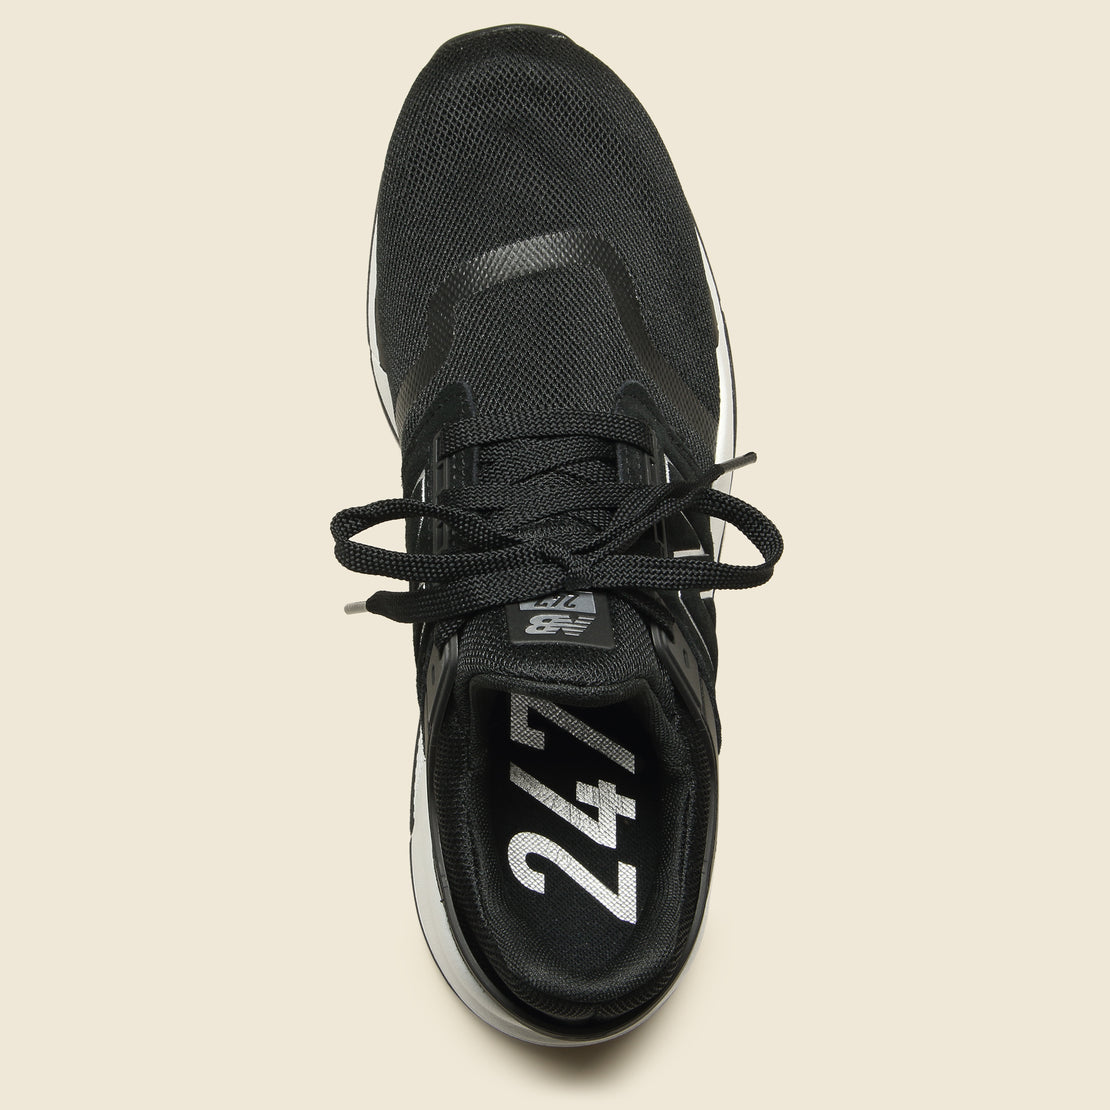 247 Sneaker - Black/Munsell - New Balance - STAG Provisions - Shoes - Athletic